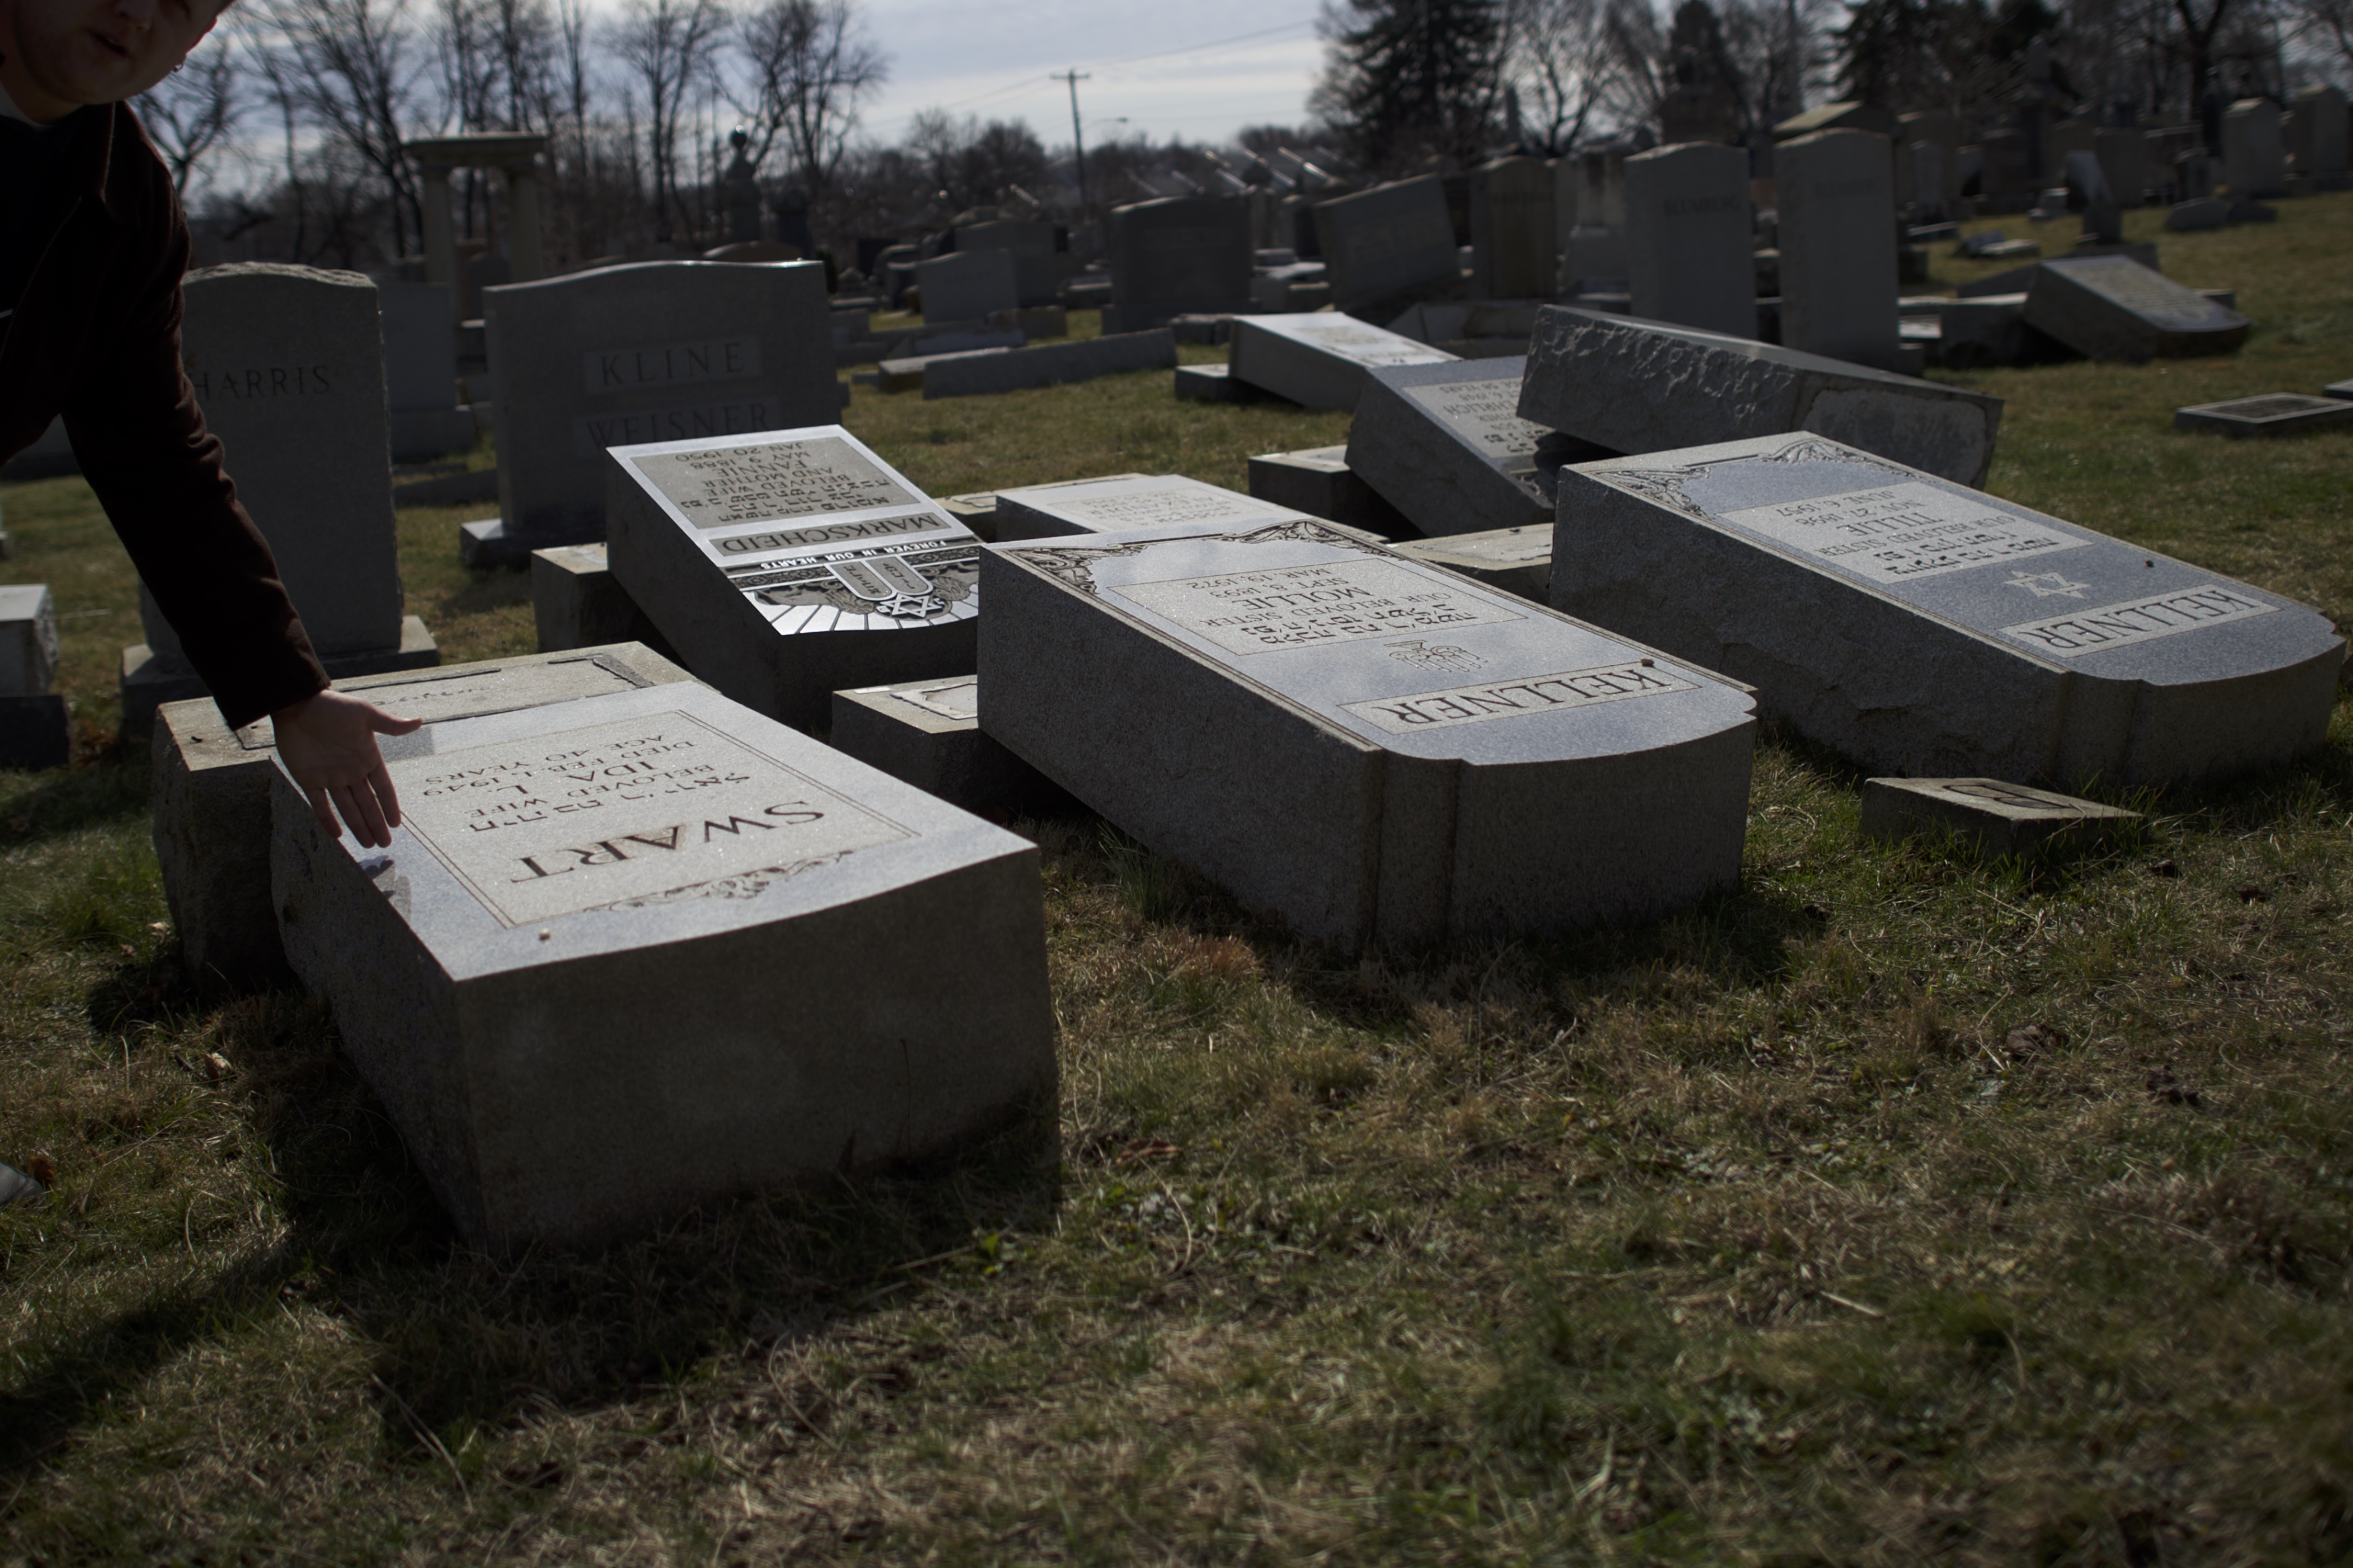 A man motions towards Jewish tombstones vandalized at Mount Carmel Cemetery February 27, 2017 in Philadelphia, (Mark Makela—Getty Images)